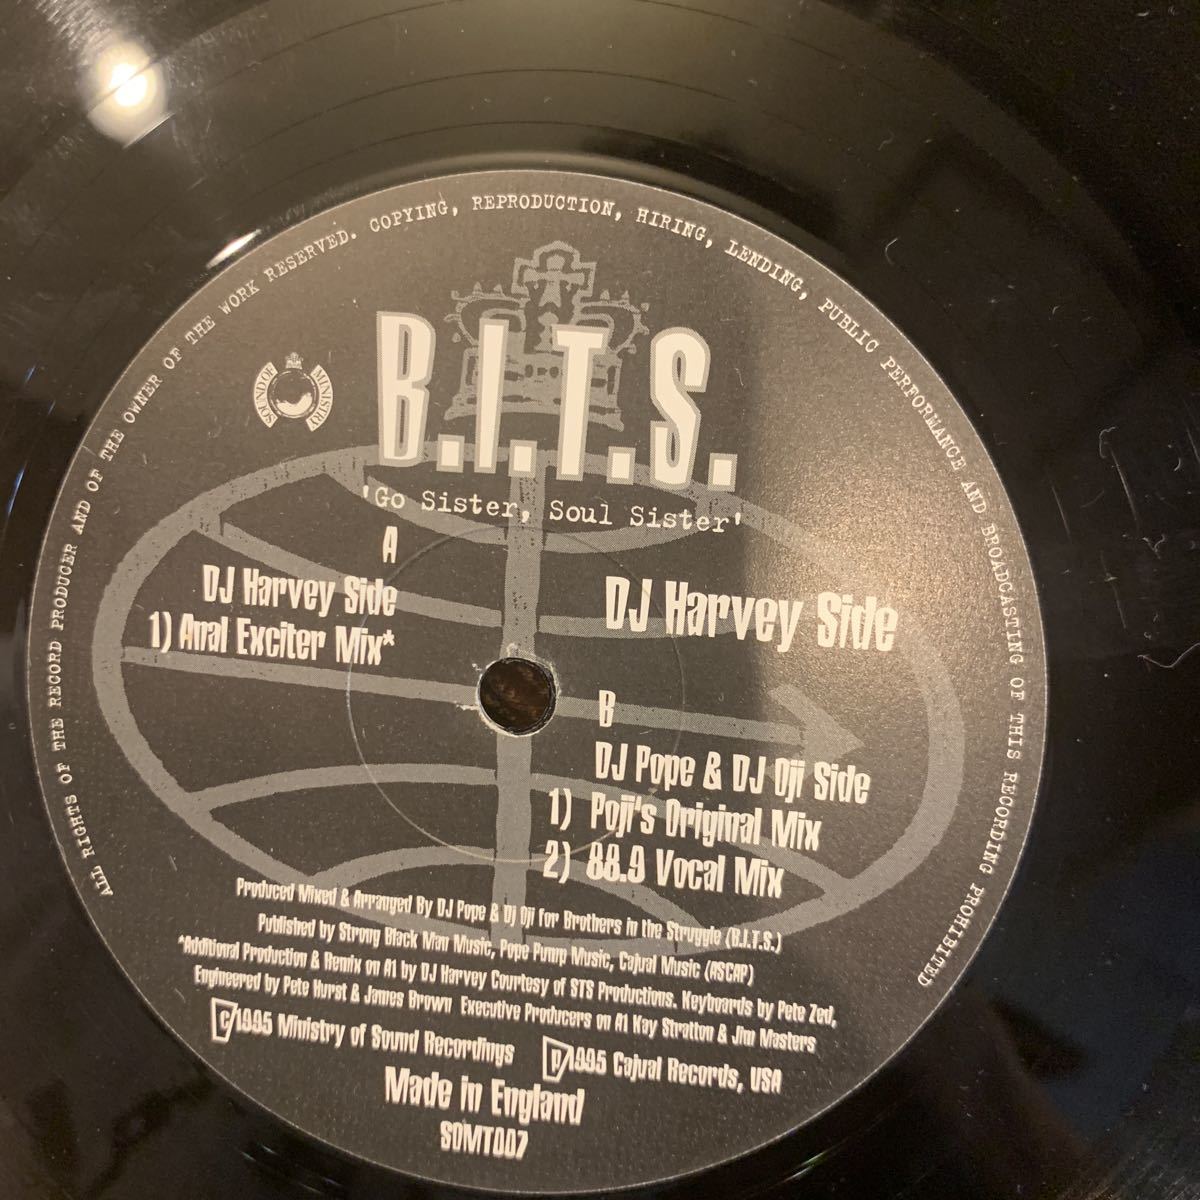 DJ HARVEY Brothers In The Struggle A Little Bit Of This, A Little Bit Of That б/у запись 